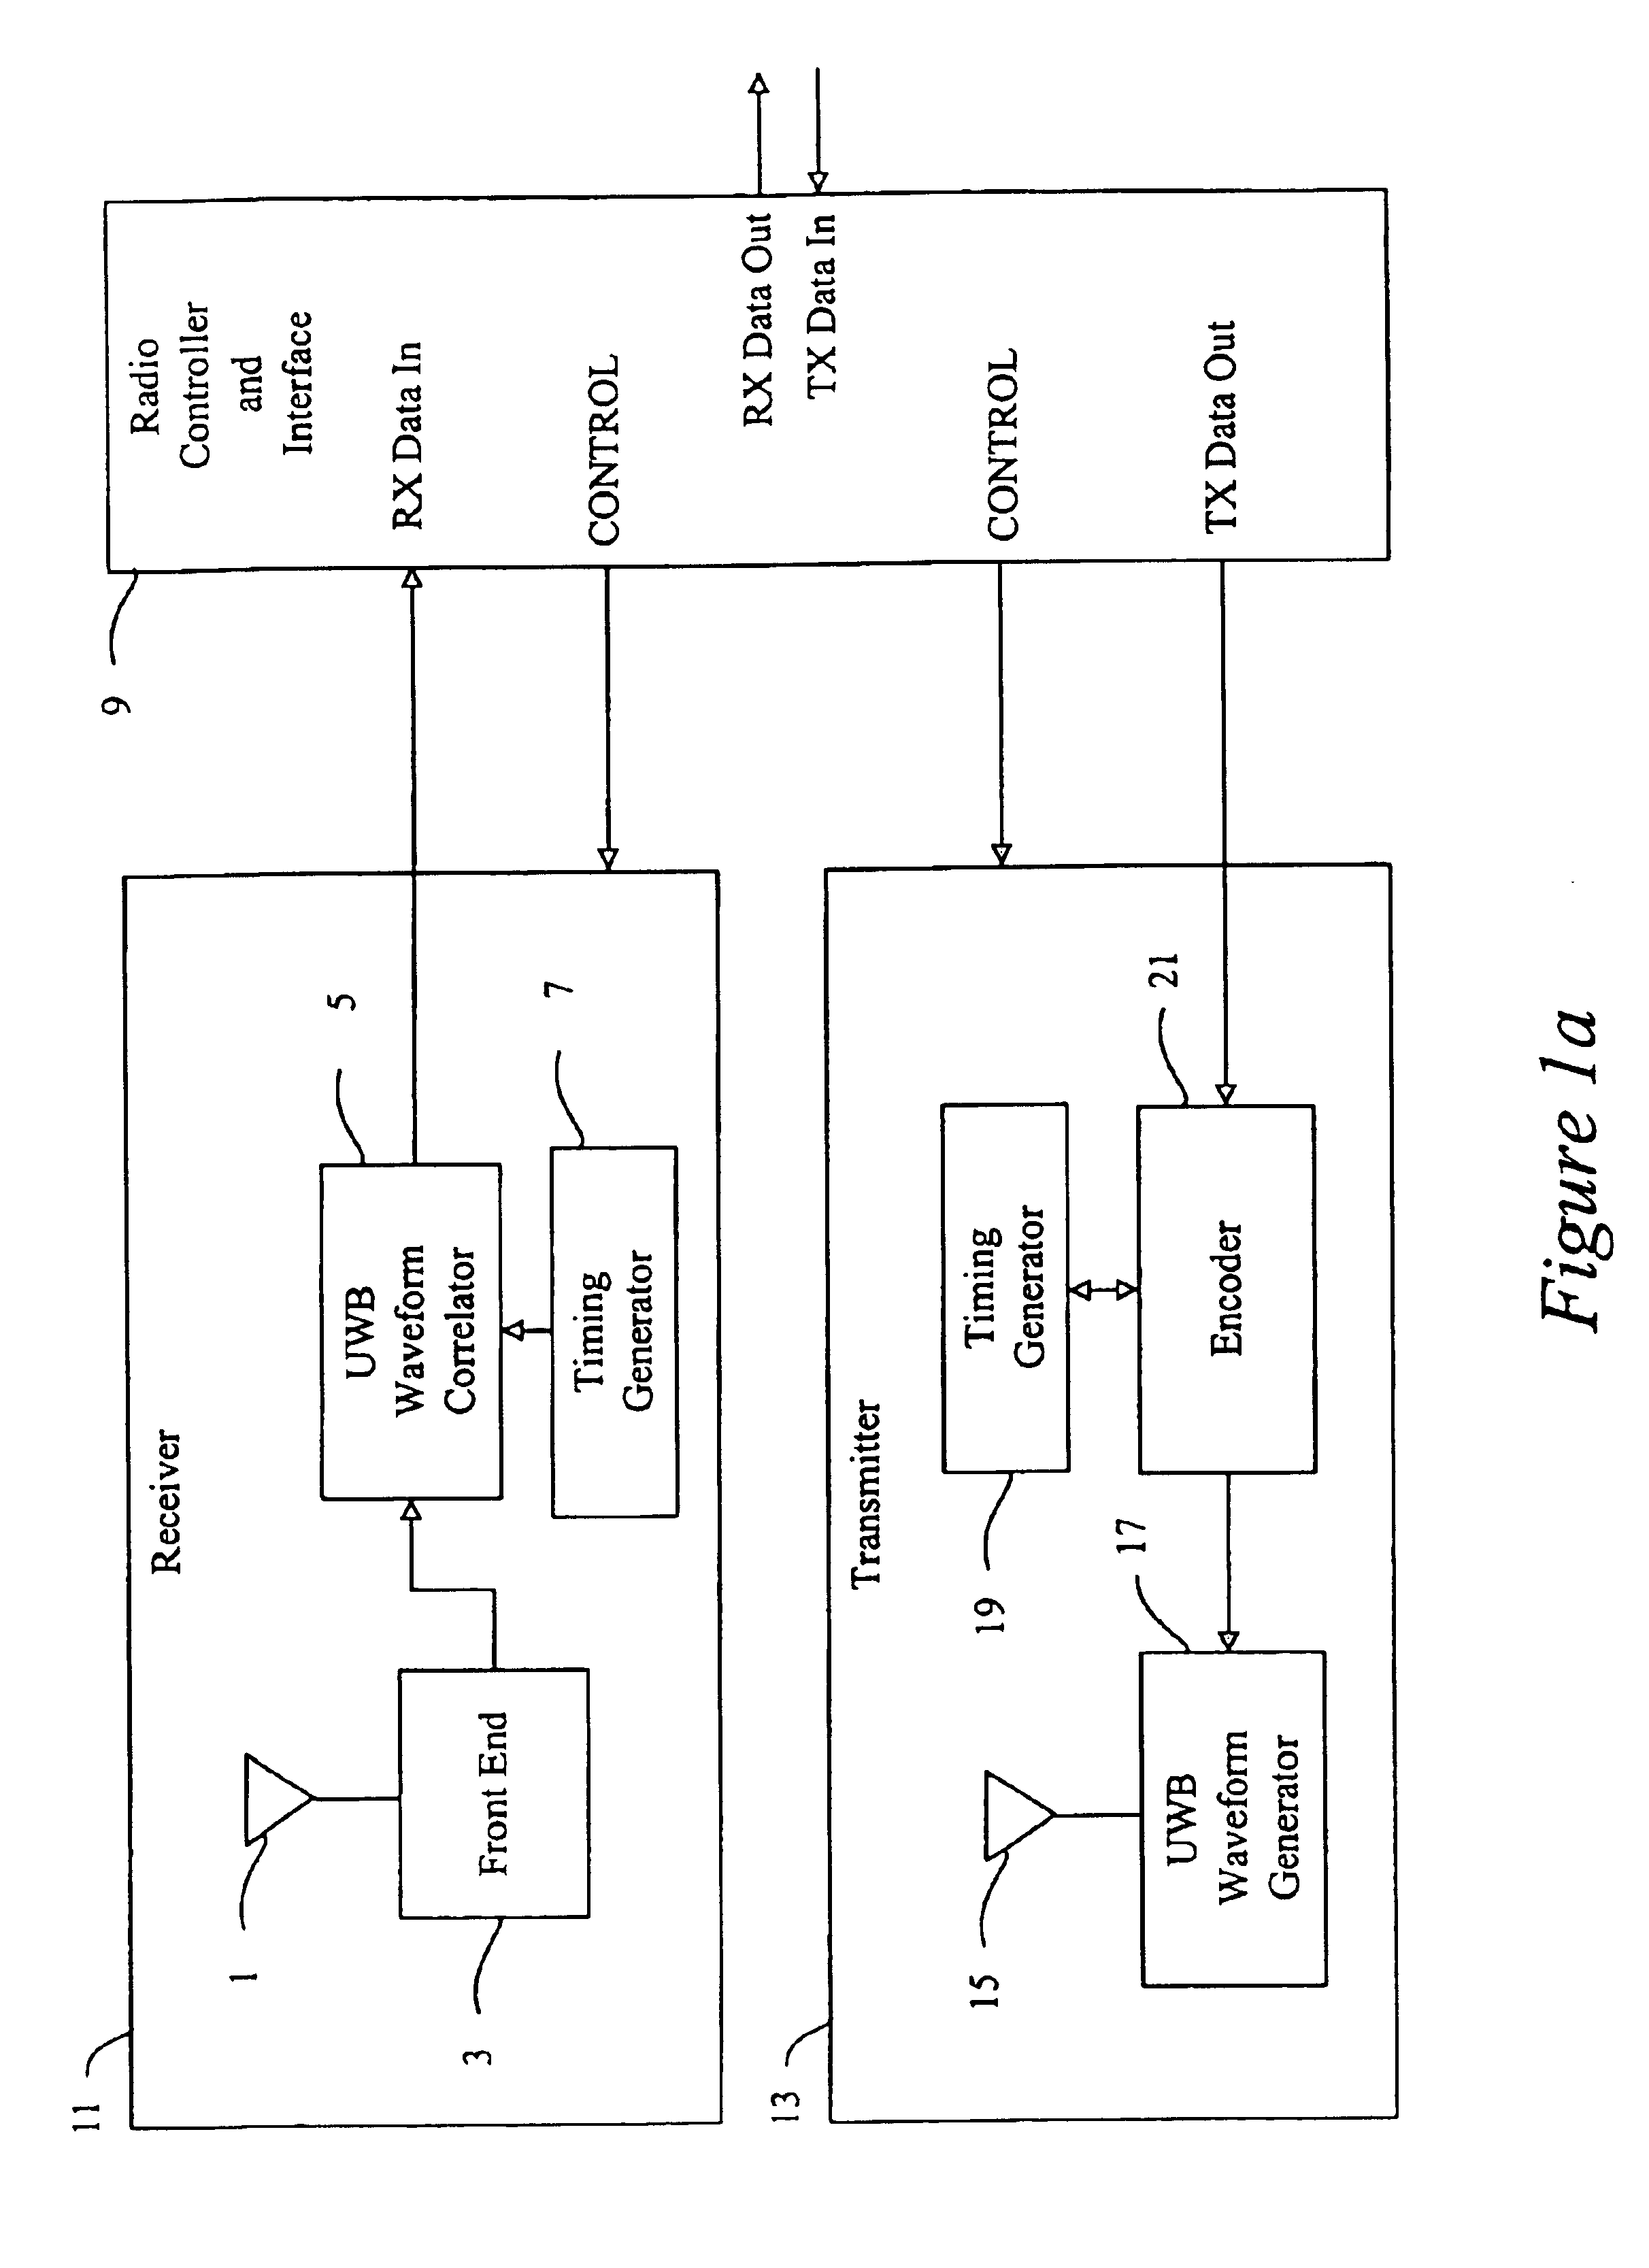 Ultra wideband communication system, method, and device with low noise reception